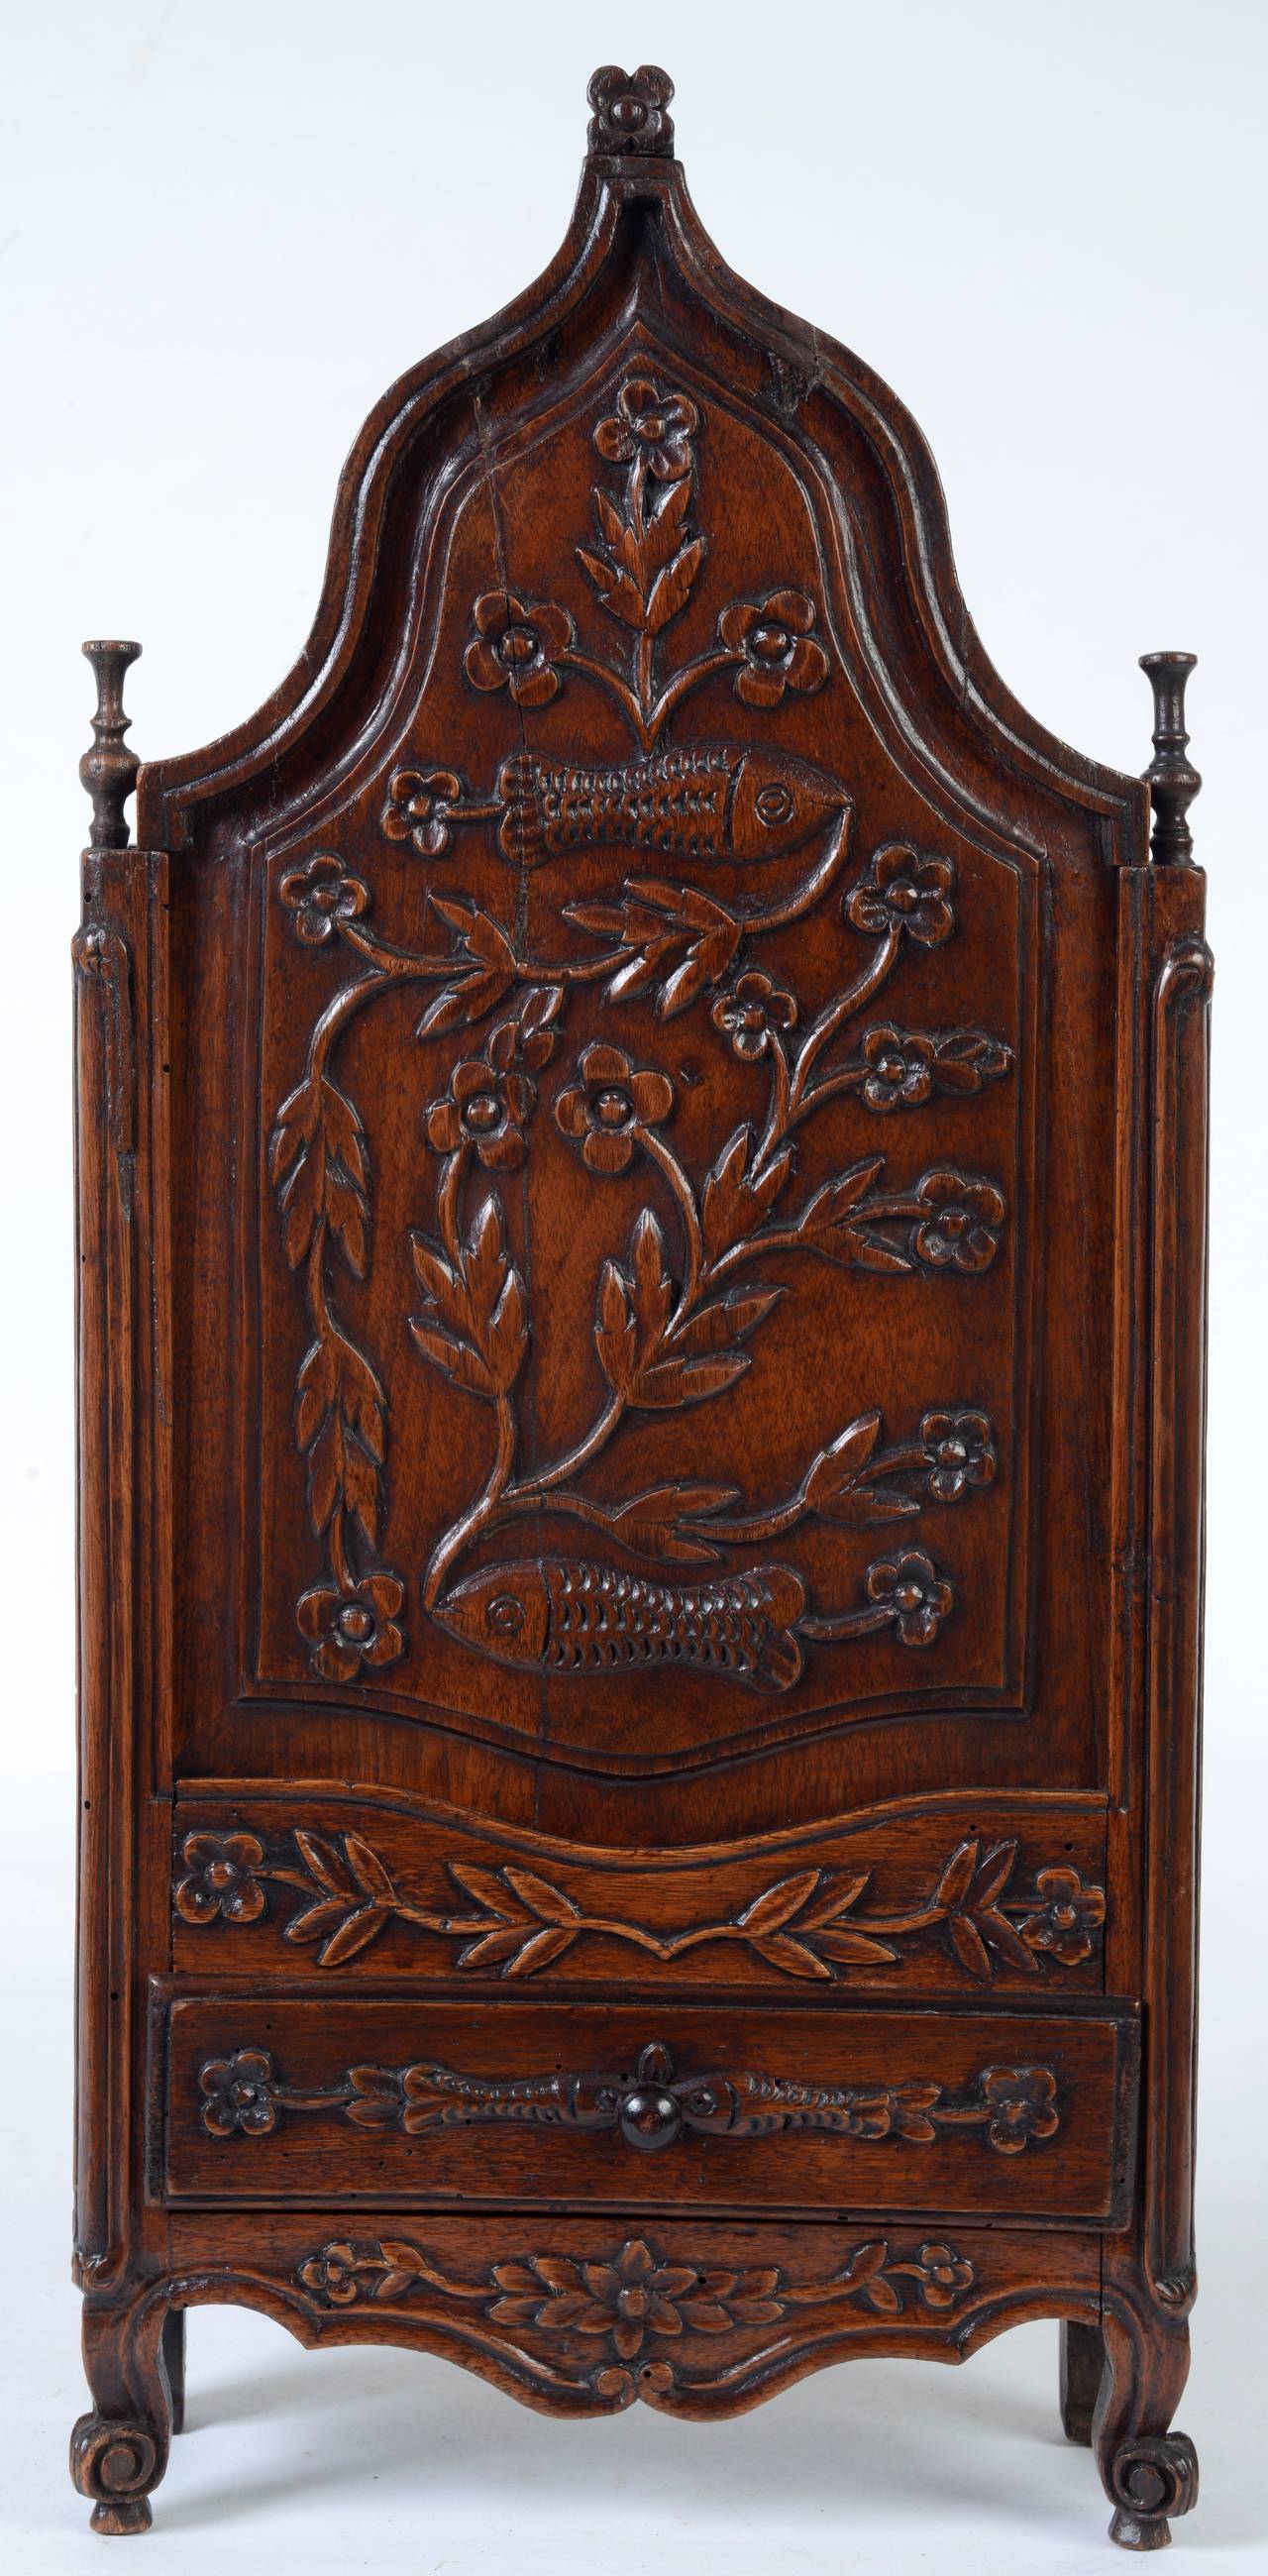 This fine French candlebox is made of hand-carved walnut. The sliding front panel is carved with stylized flowers and fish. It has a single drawer also carved with fish and flowers. It stands on cabriole legs with escargot carved feet and is topped